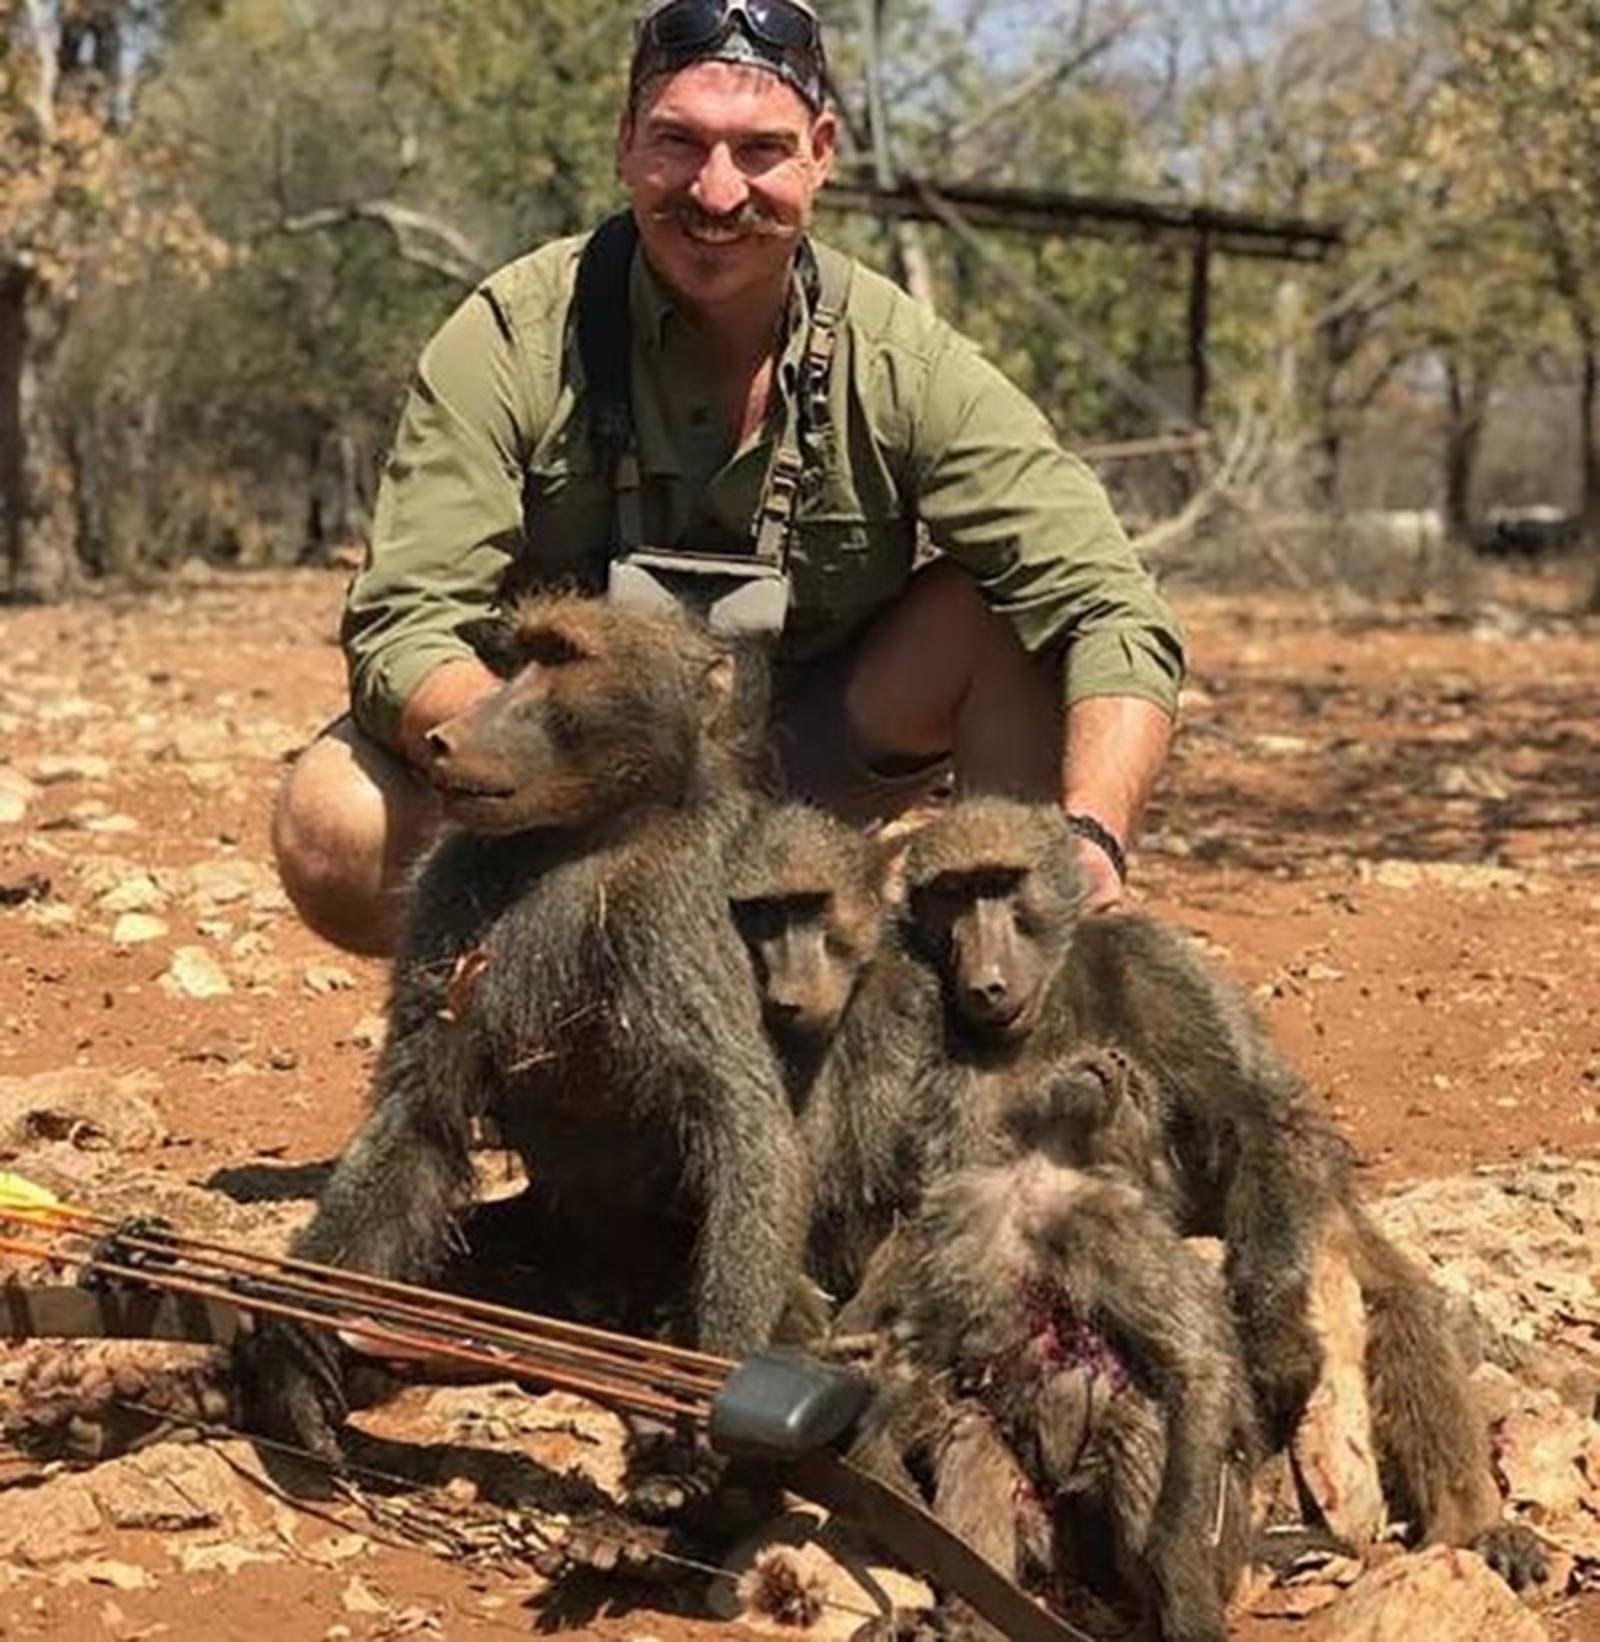 Former Idaho Fish and Game Commissioner Blake Fischer posing in the photo that resulted in his resignation and set off a global firestorm.  Following his outing, he circulated the photo with the message: "I shot a whole family of baboons."